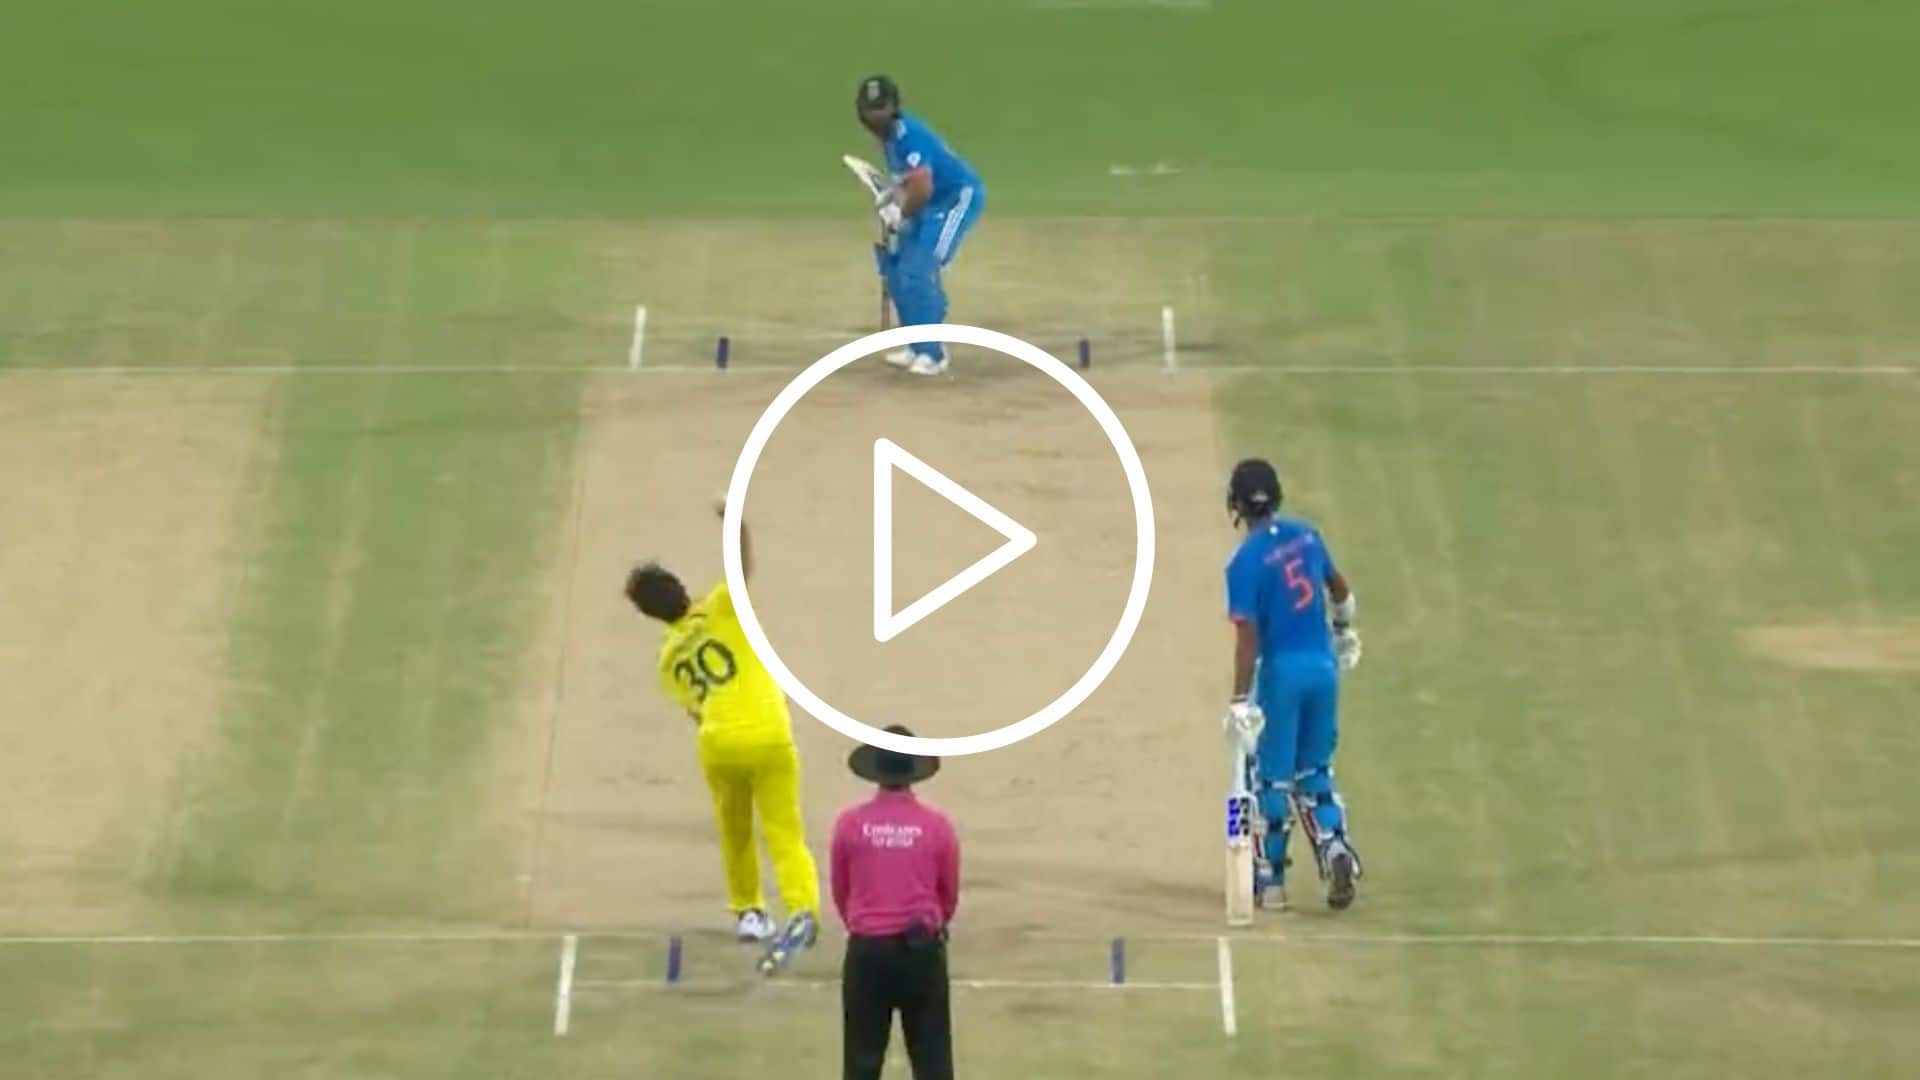 [Watch] Rohit Sharma Hits 52nd ODI Fifty As He Tonks Aussies For Record Breaking 5 Sixes